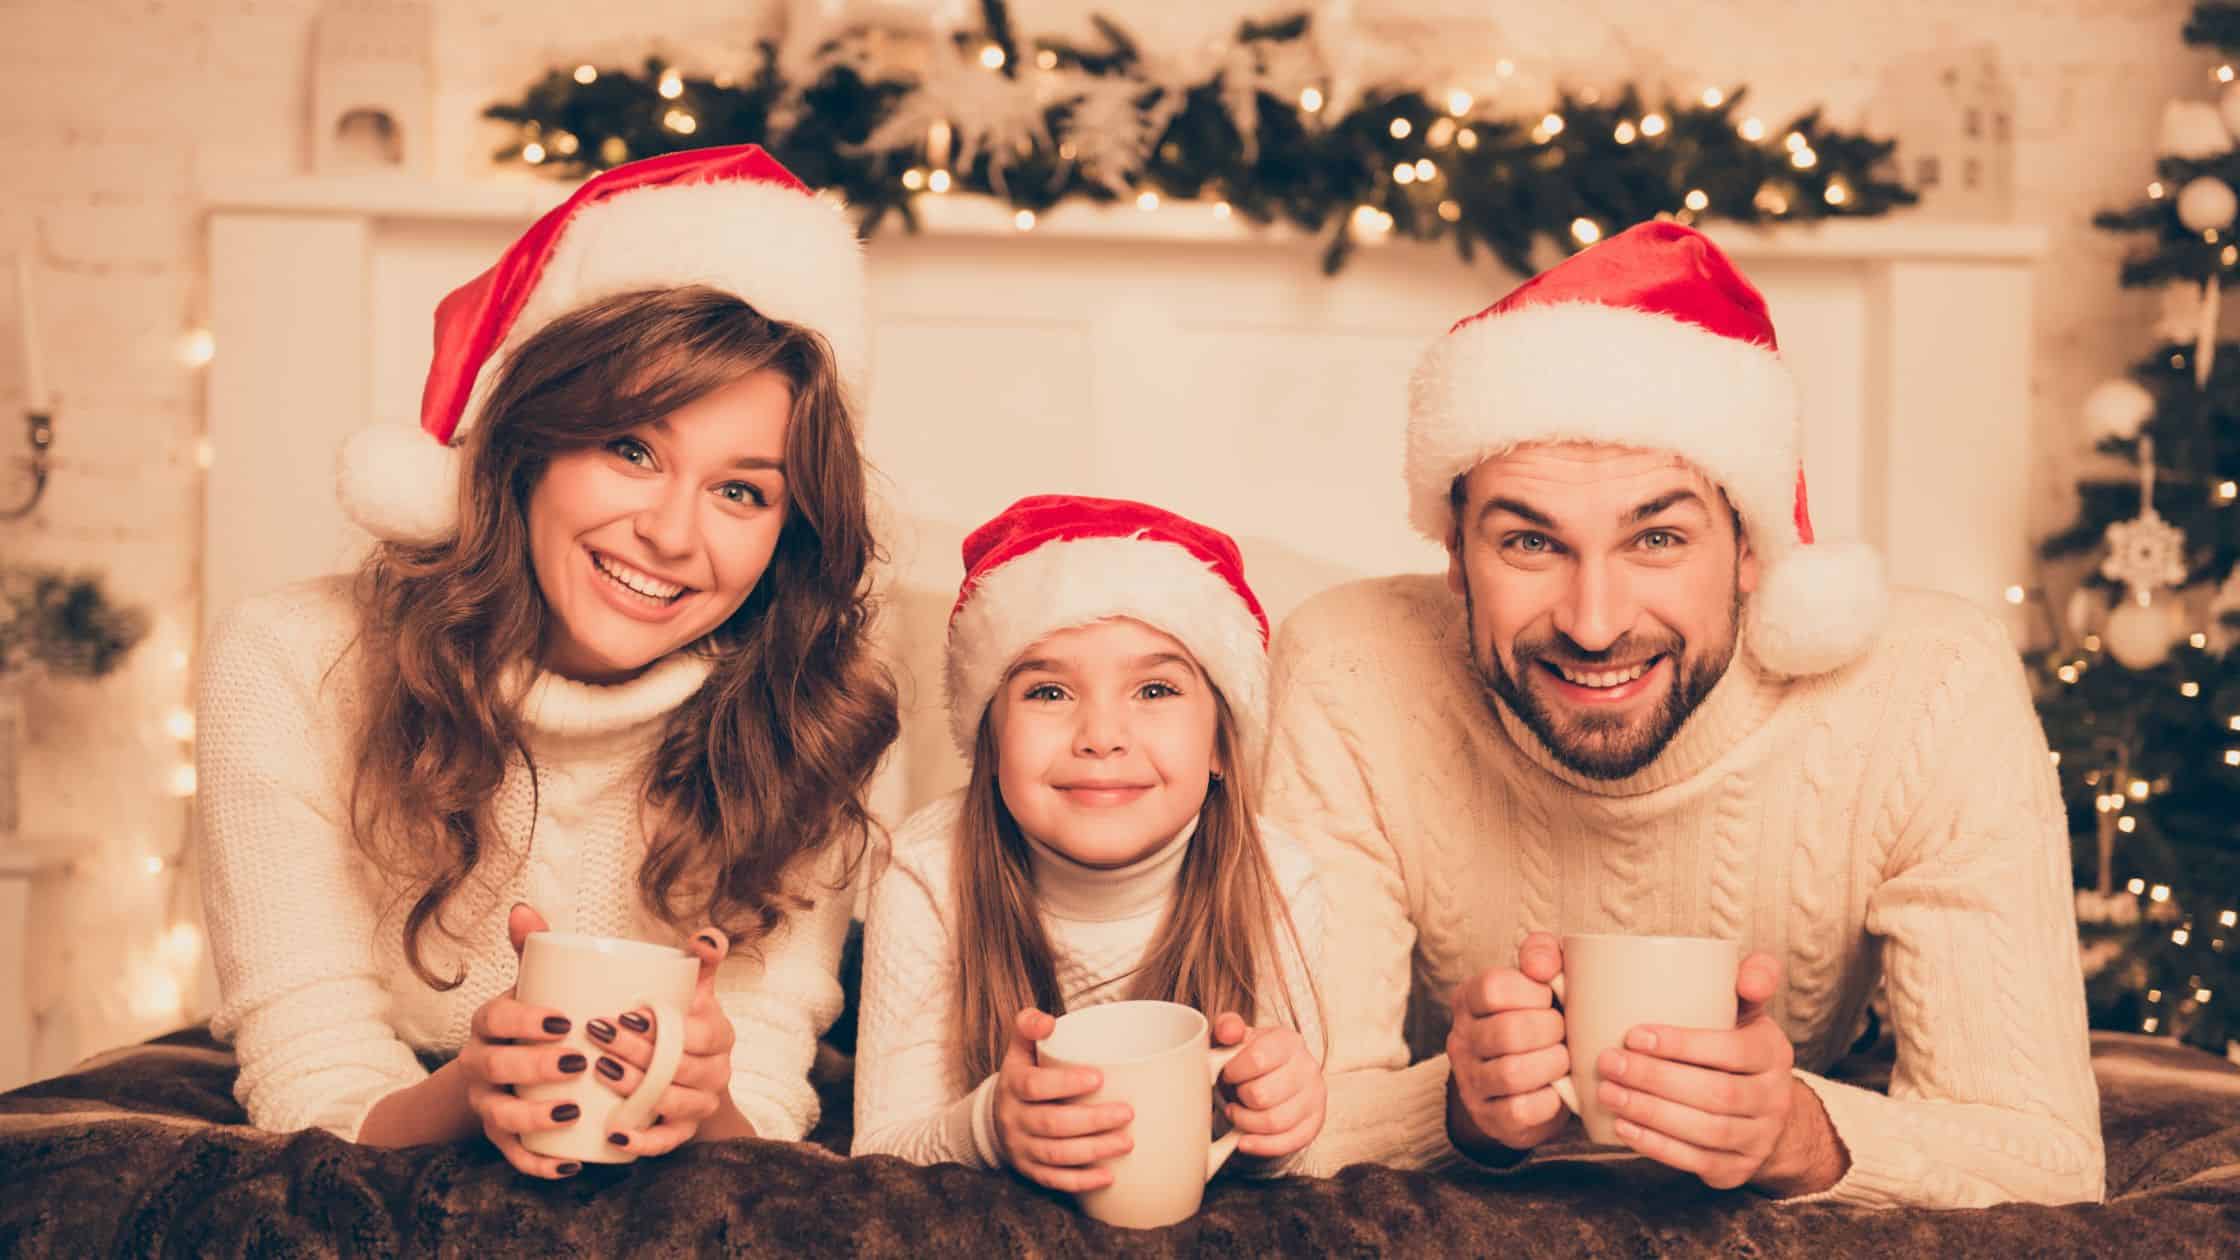 19 Festive and Fun Christmas Activities for Kids